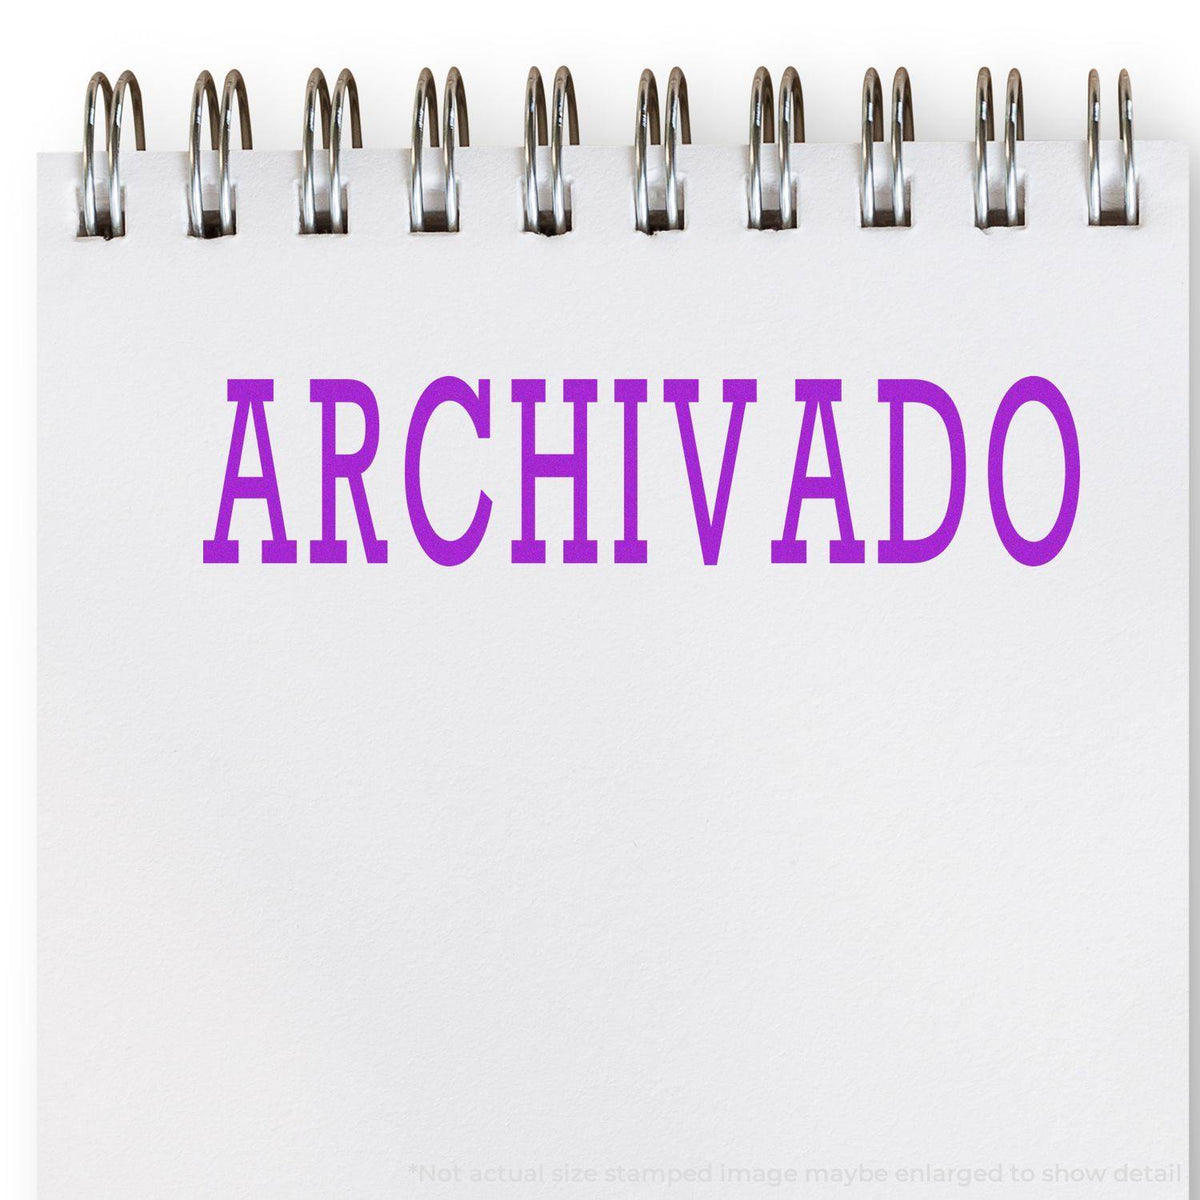 In Use Archivado Rubber Stamp Image